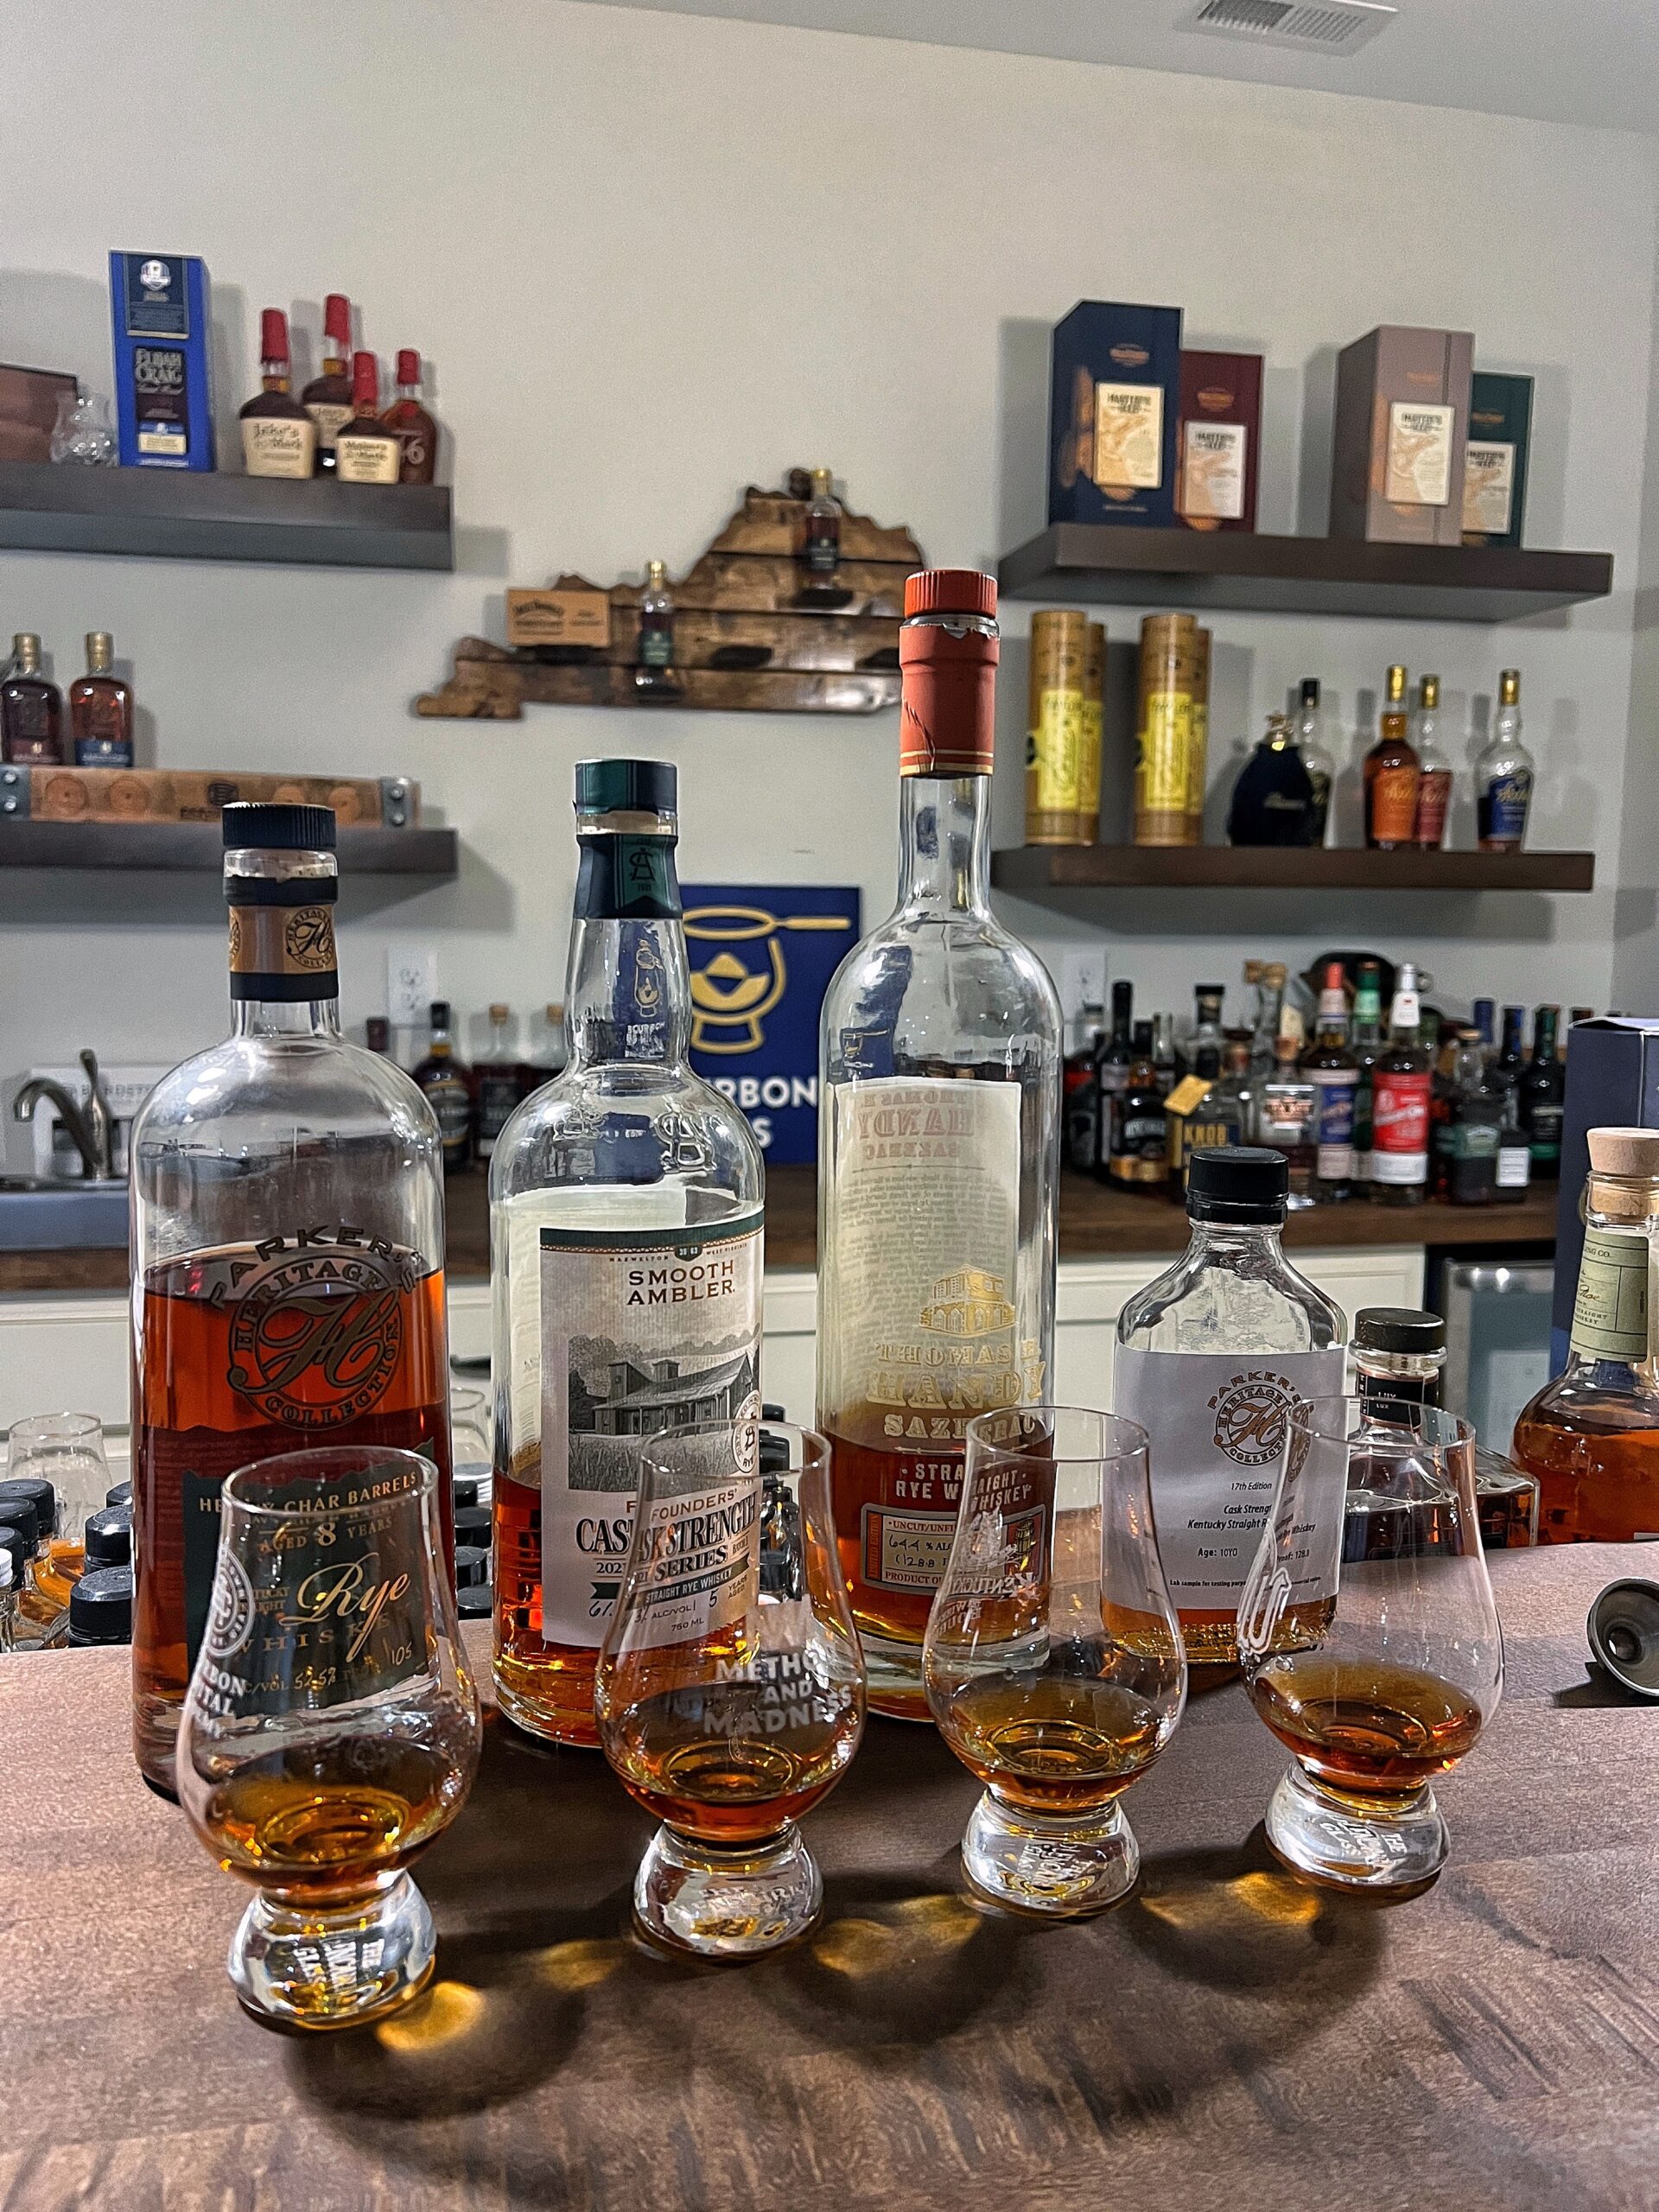 Parker's Heritage Rye Whiskey, Thomas H Handy, and Smooth Ambler Founders on a bar back